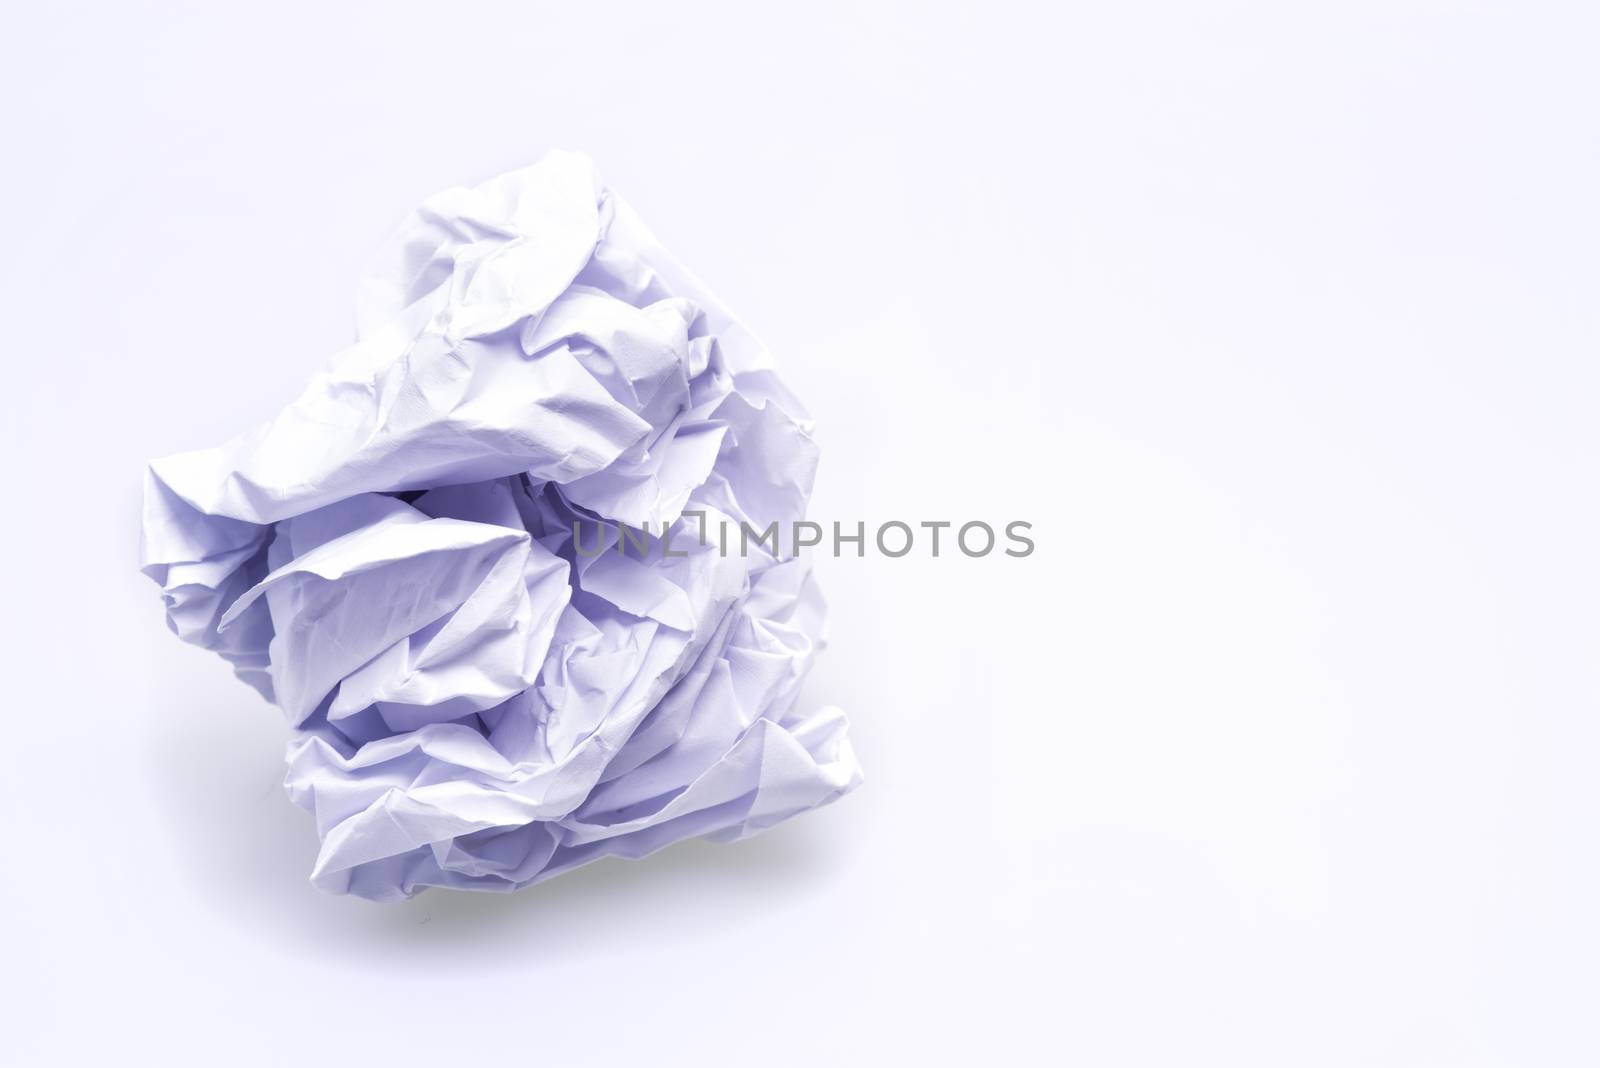 Crumpled paper ball by savcoco